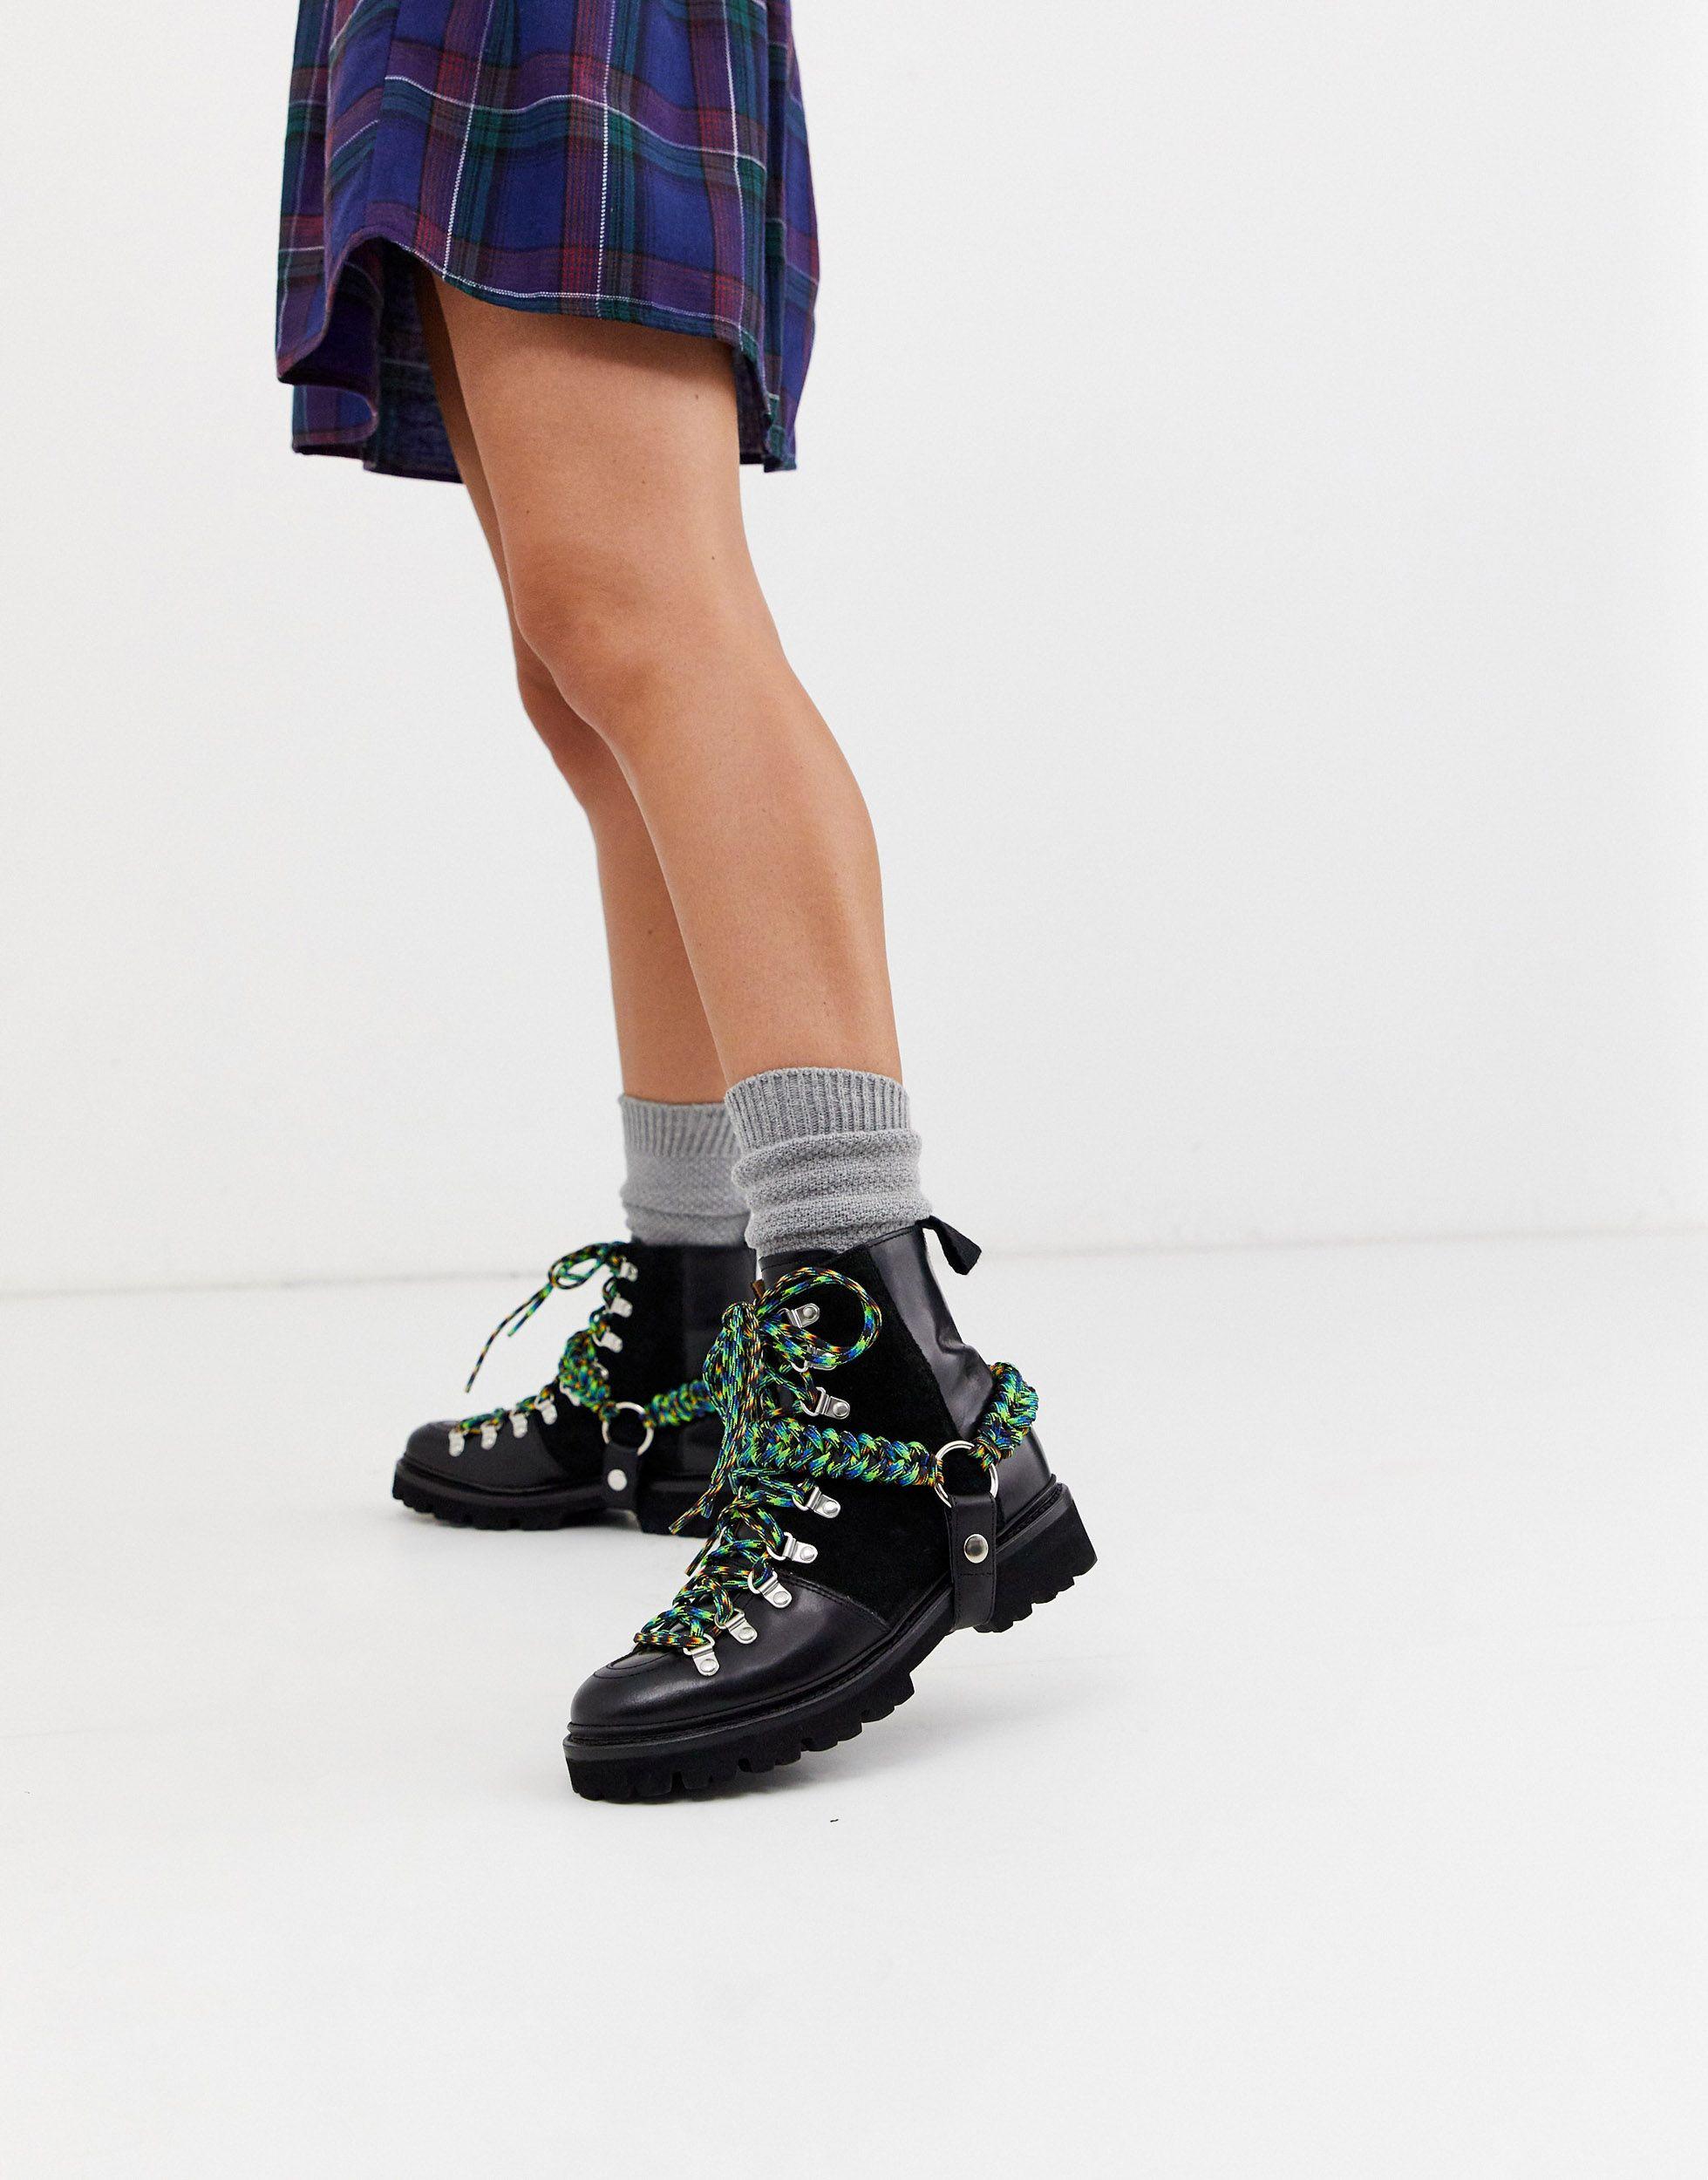 House of Holland X Grenson Solid Black And Lime Nanette Leather Biker Boots  - Lyst